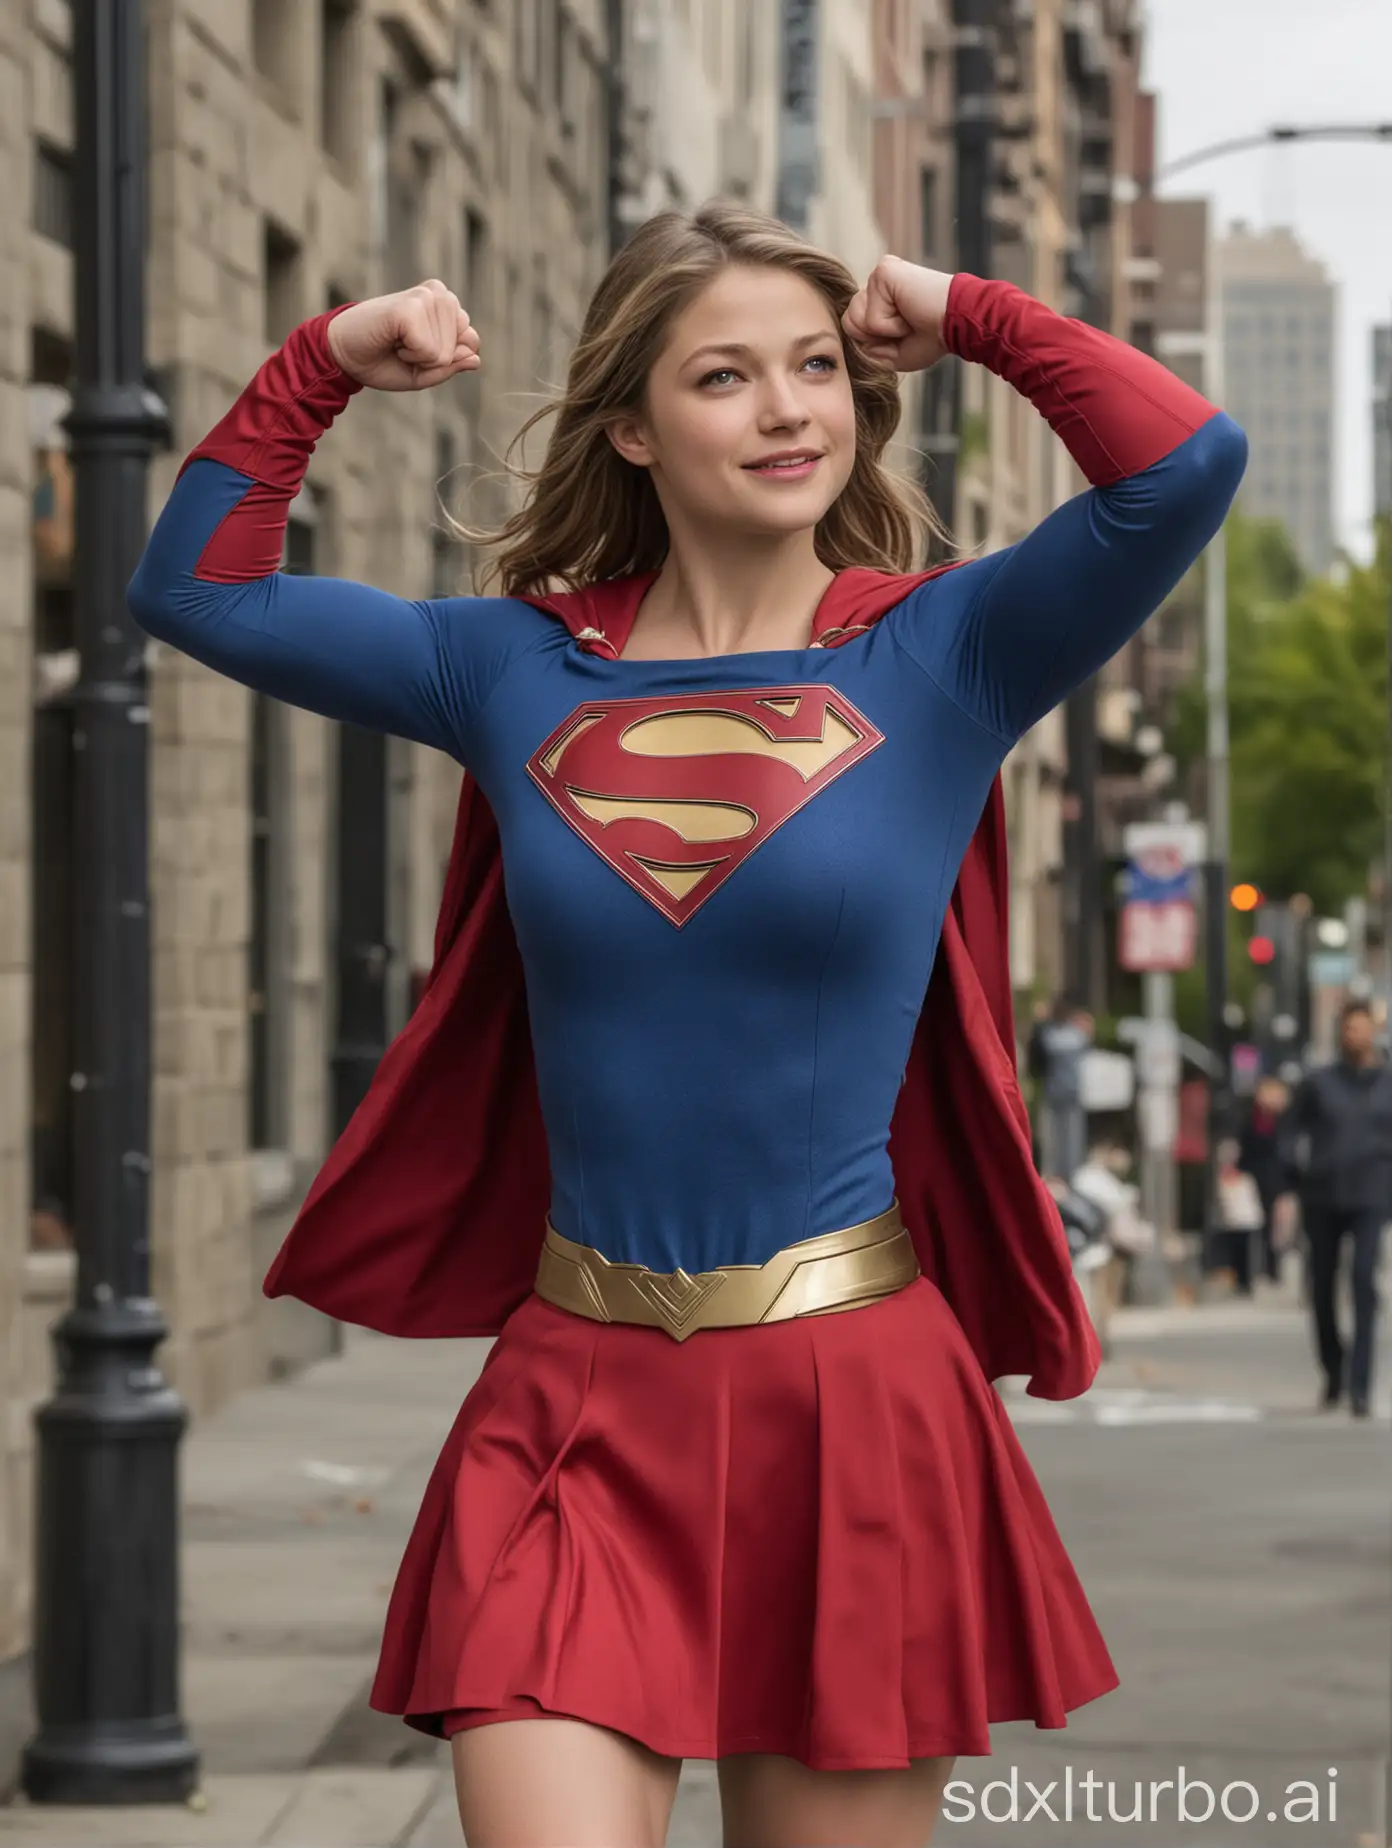 Melissa Benoist wearing Supergirl costume with red skirt, flexing ((large strong biceps)), in long sleeves dslr, in city